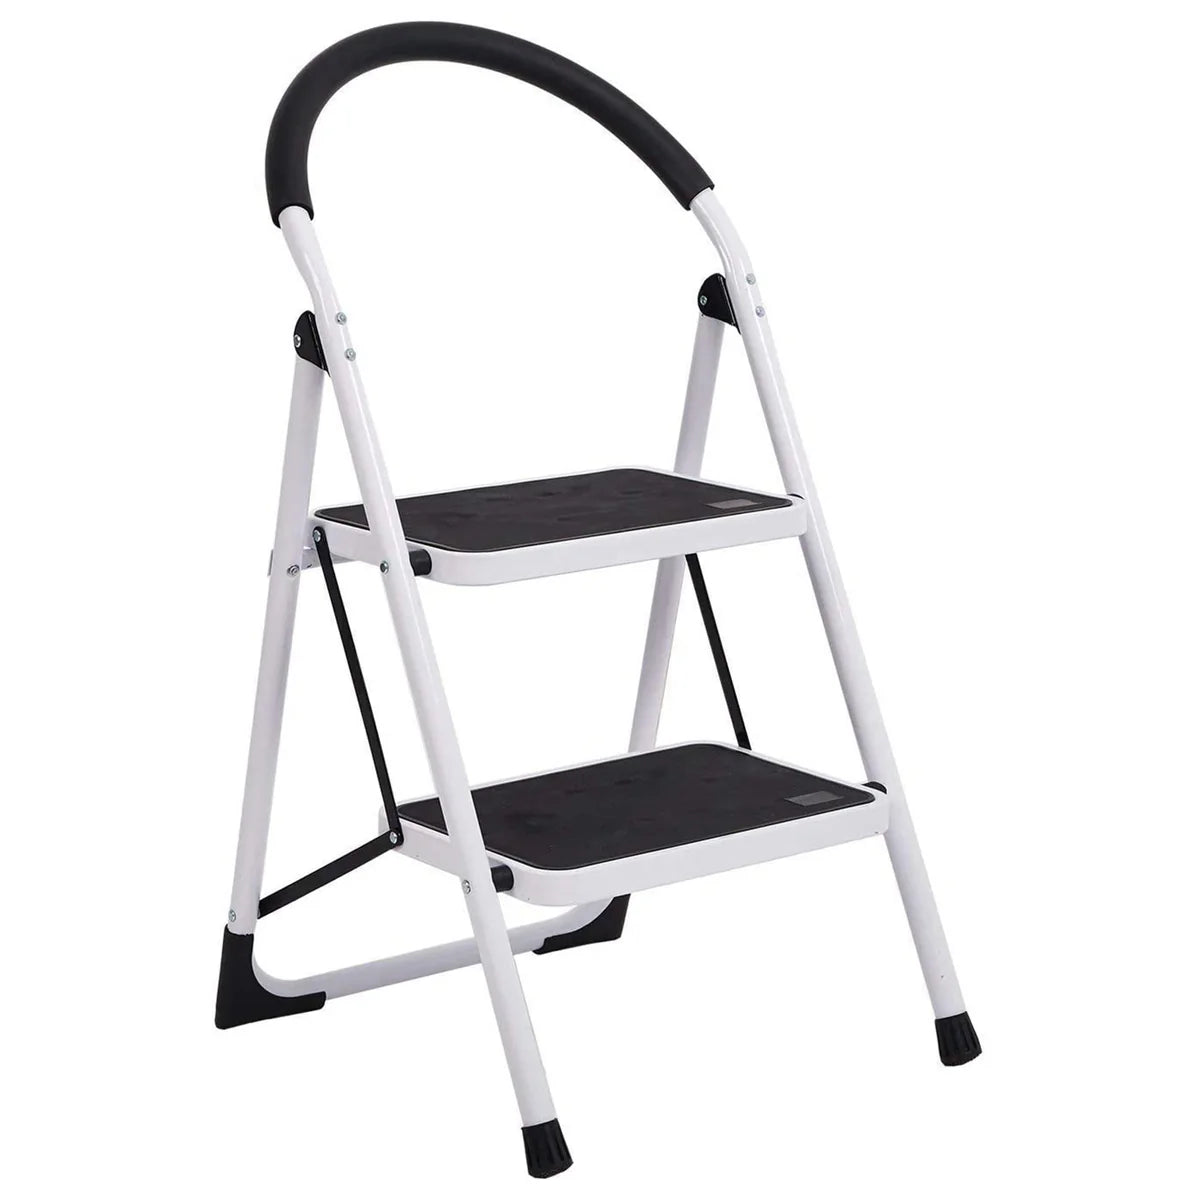 2 Step Ladder Folding Step Stool with Soft Grip Handle and Anti-Slip Wide Pedal, 330 lbs Capacity